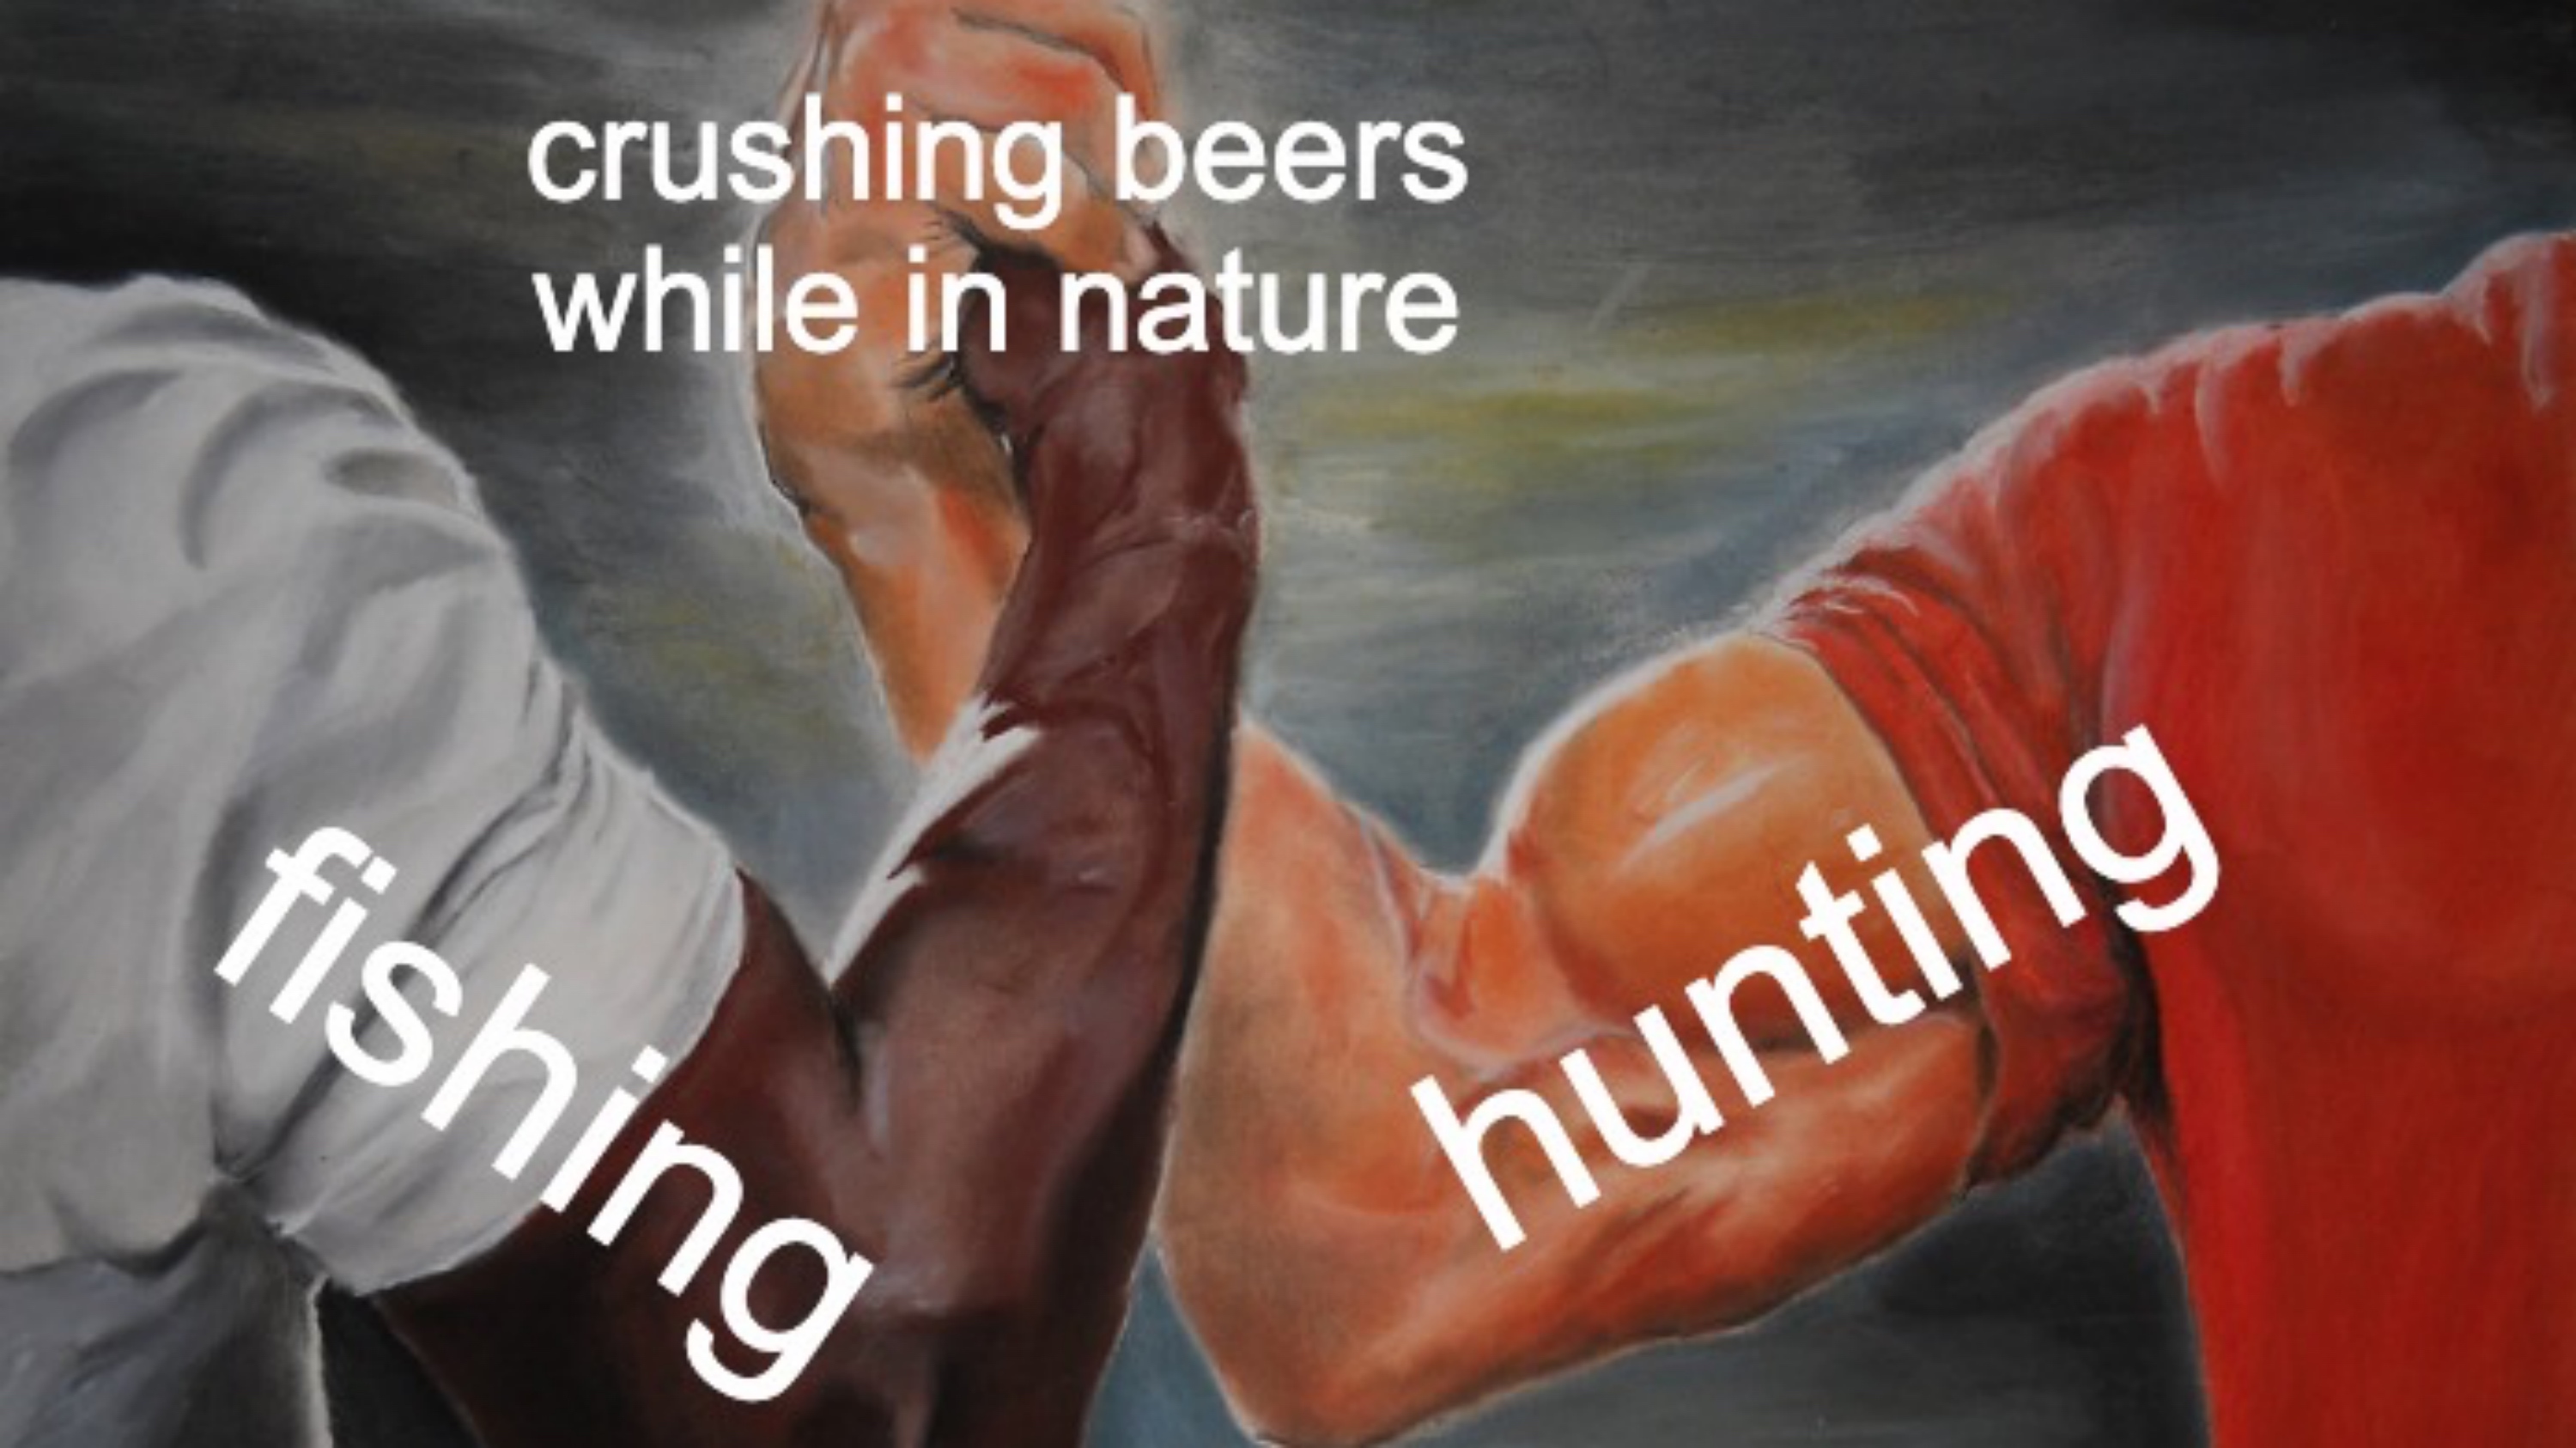 funny meme about crushing beers in nature